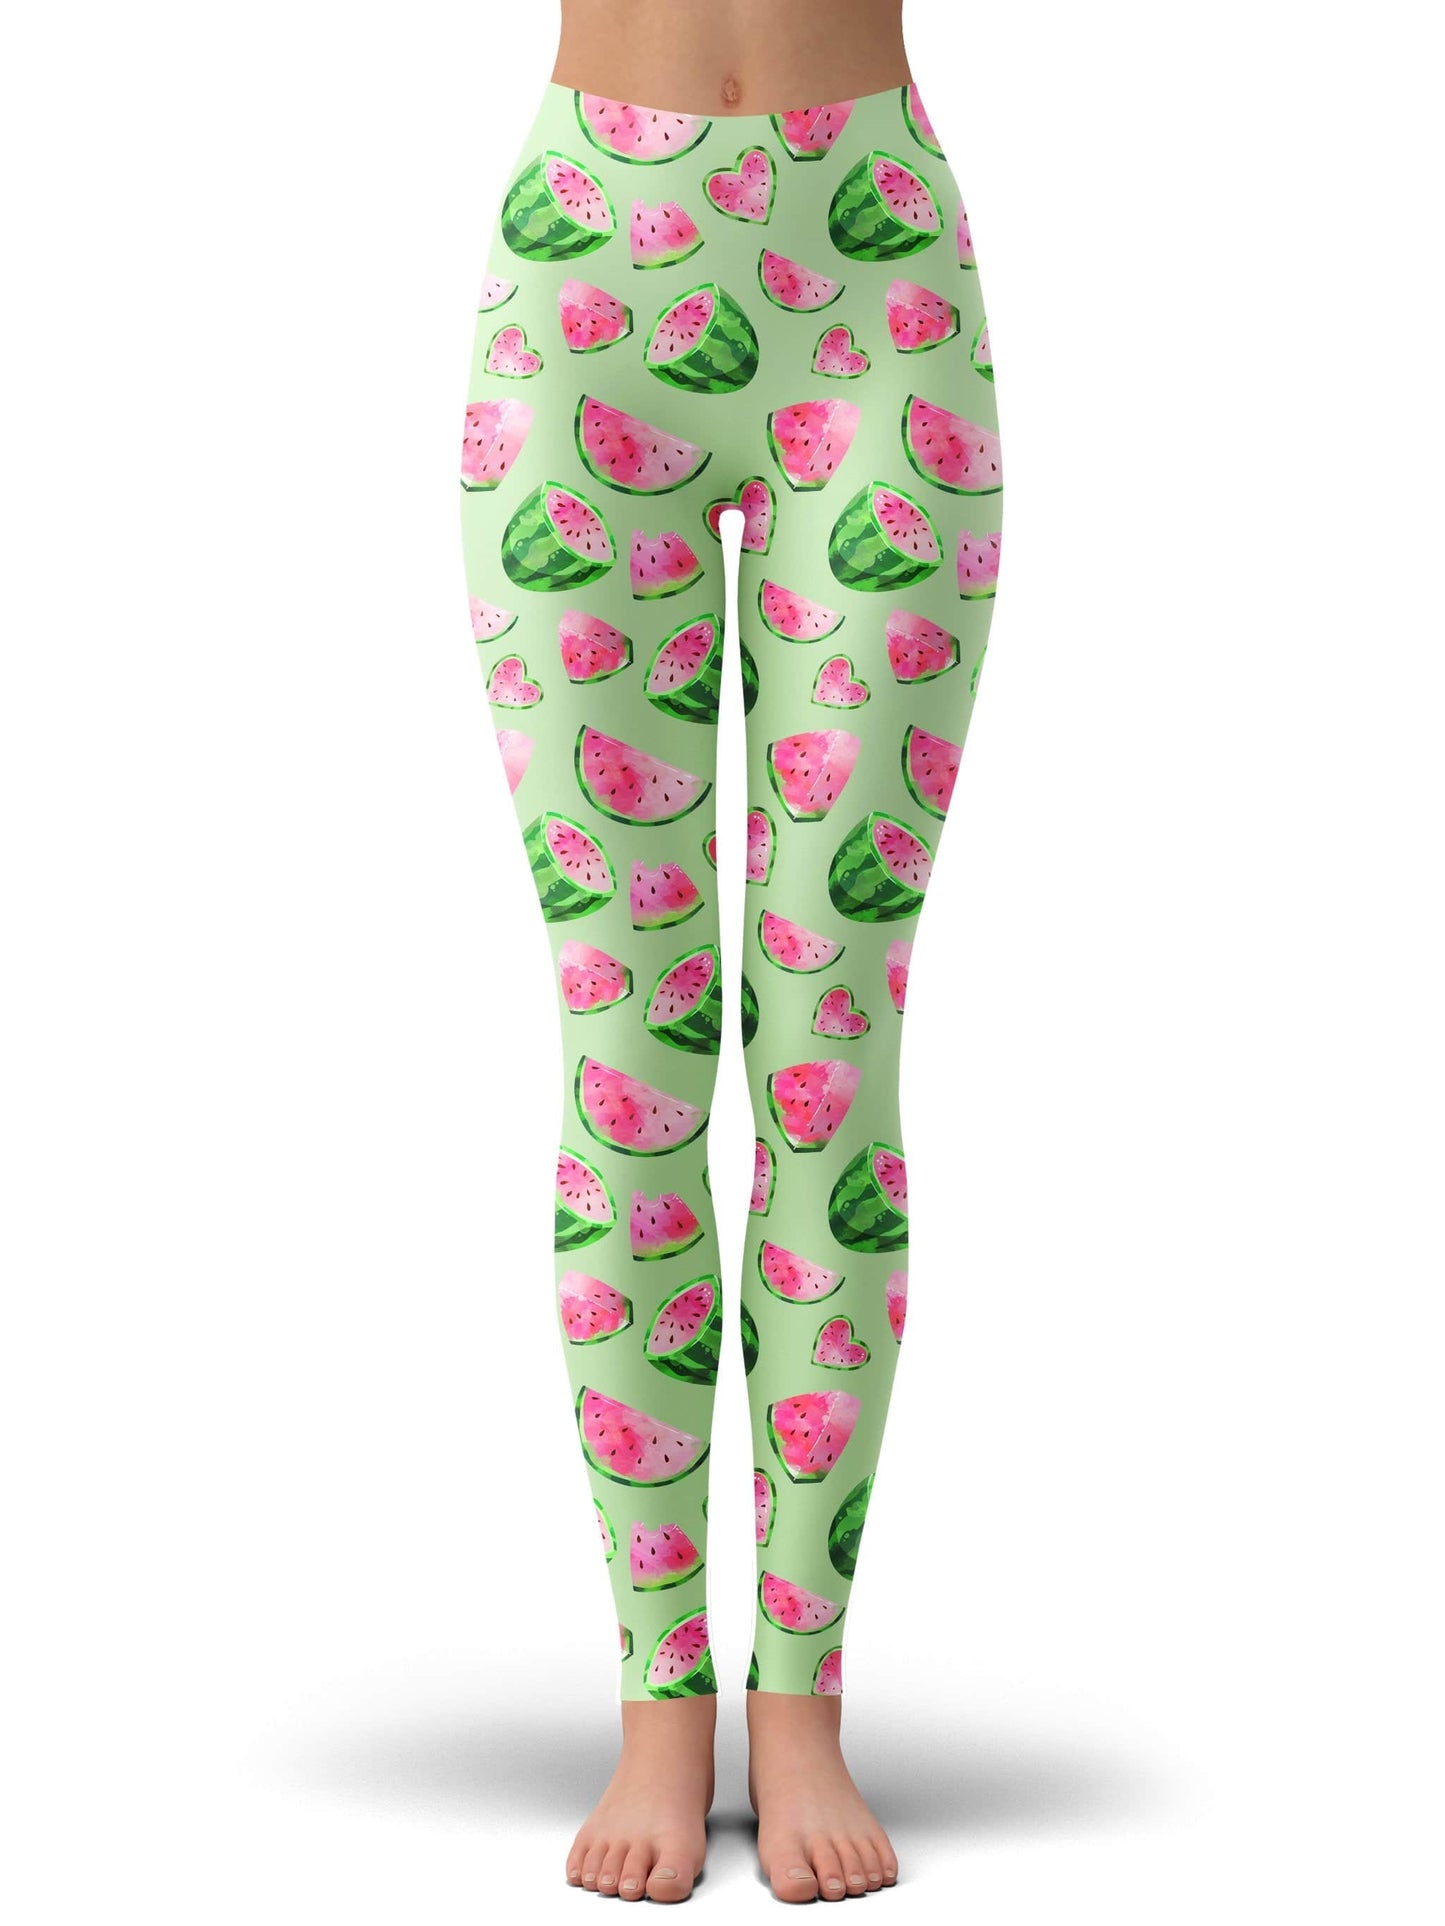 Watermelon Pattern Hoodie Dress and Leggings with PM 2.5 Face Mask Combo, iEDM, | iEDM